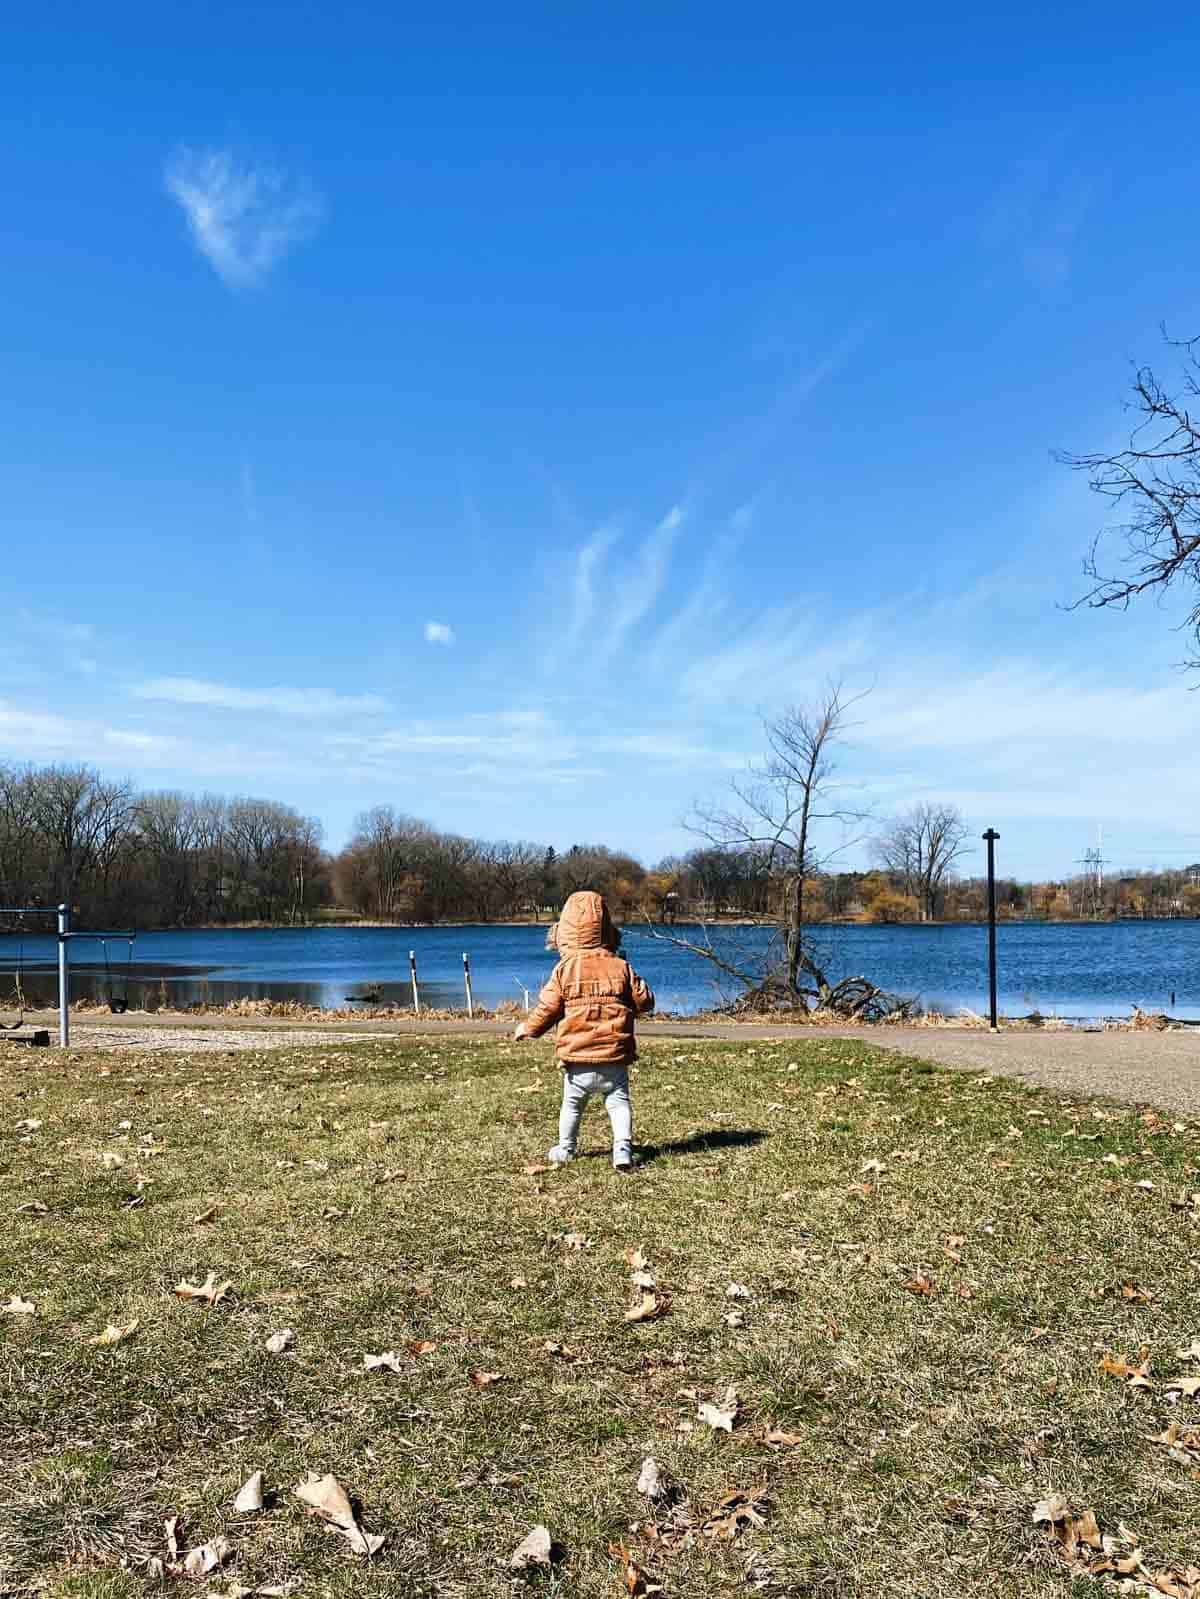 A young child in a brown jacket with the hood over their head walks near the water alone.